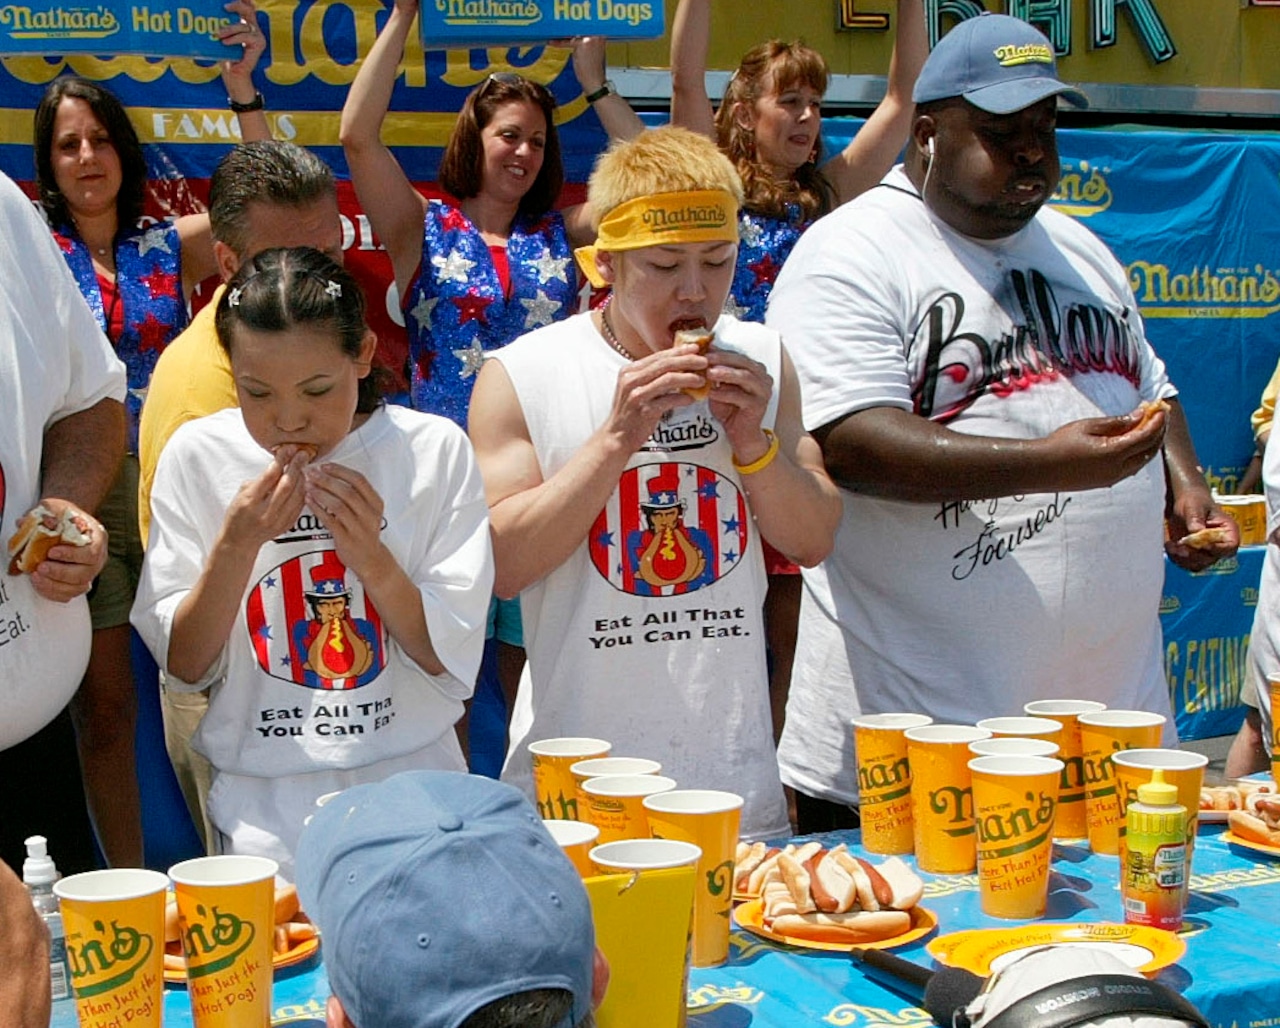 World-famous competitive eater retires due to health [Video]